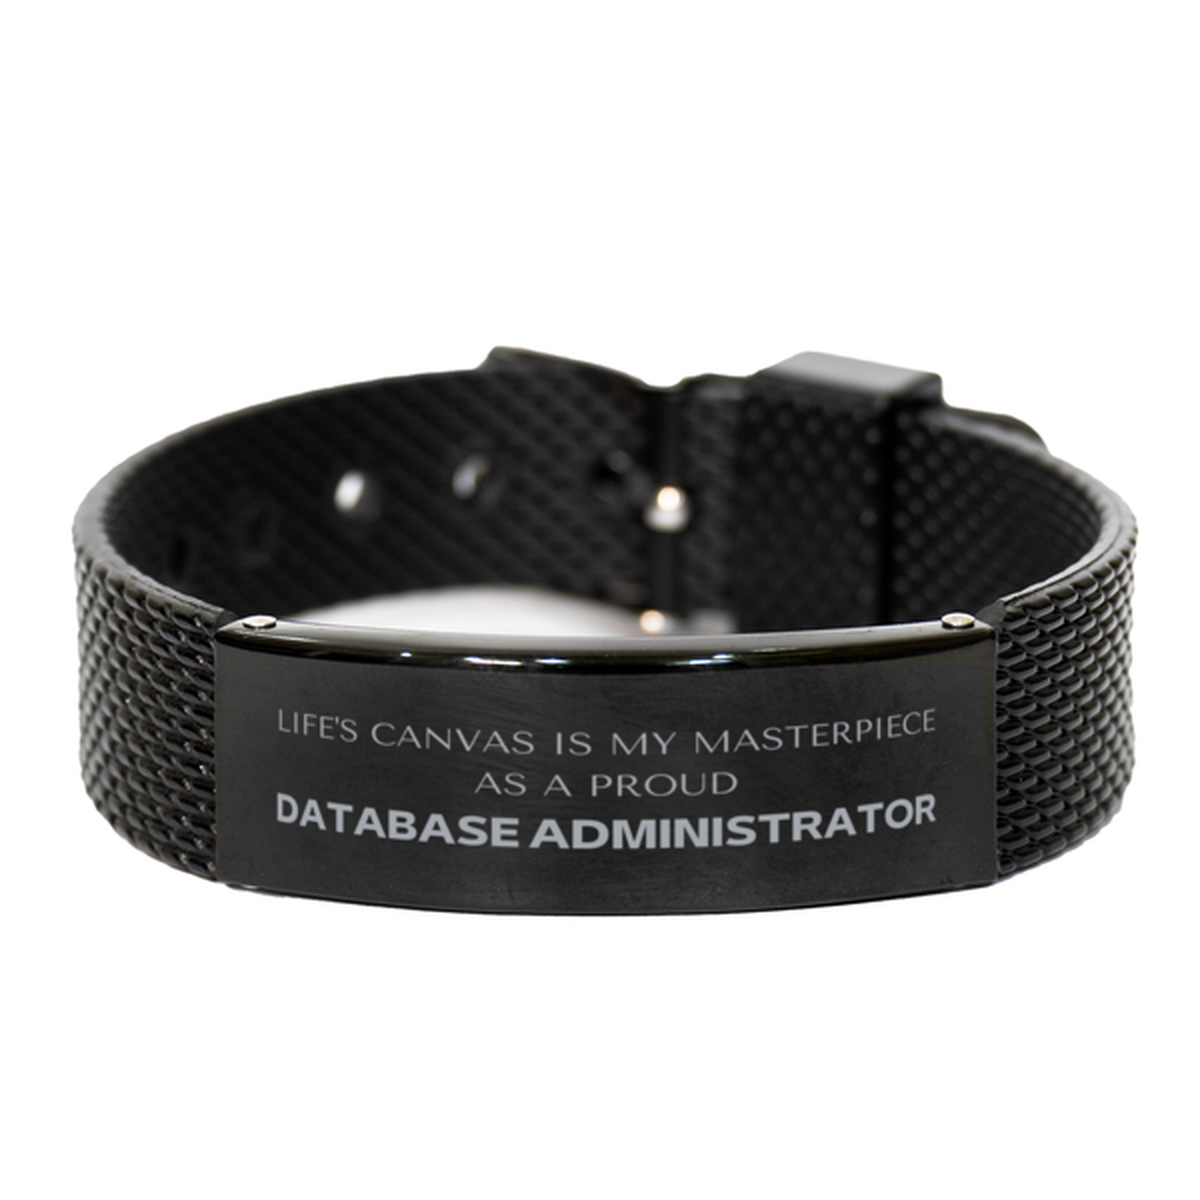 Proud Database Administrator Gifts, Life's canvas is my masterpiece, Epic Birthday Christmas Unique Black Shark Mesh Bracelet For Database Administrator, Coworkers, Men, Women, Friends